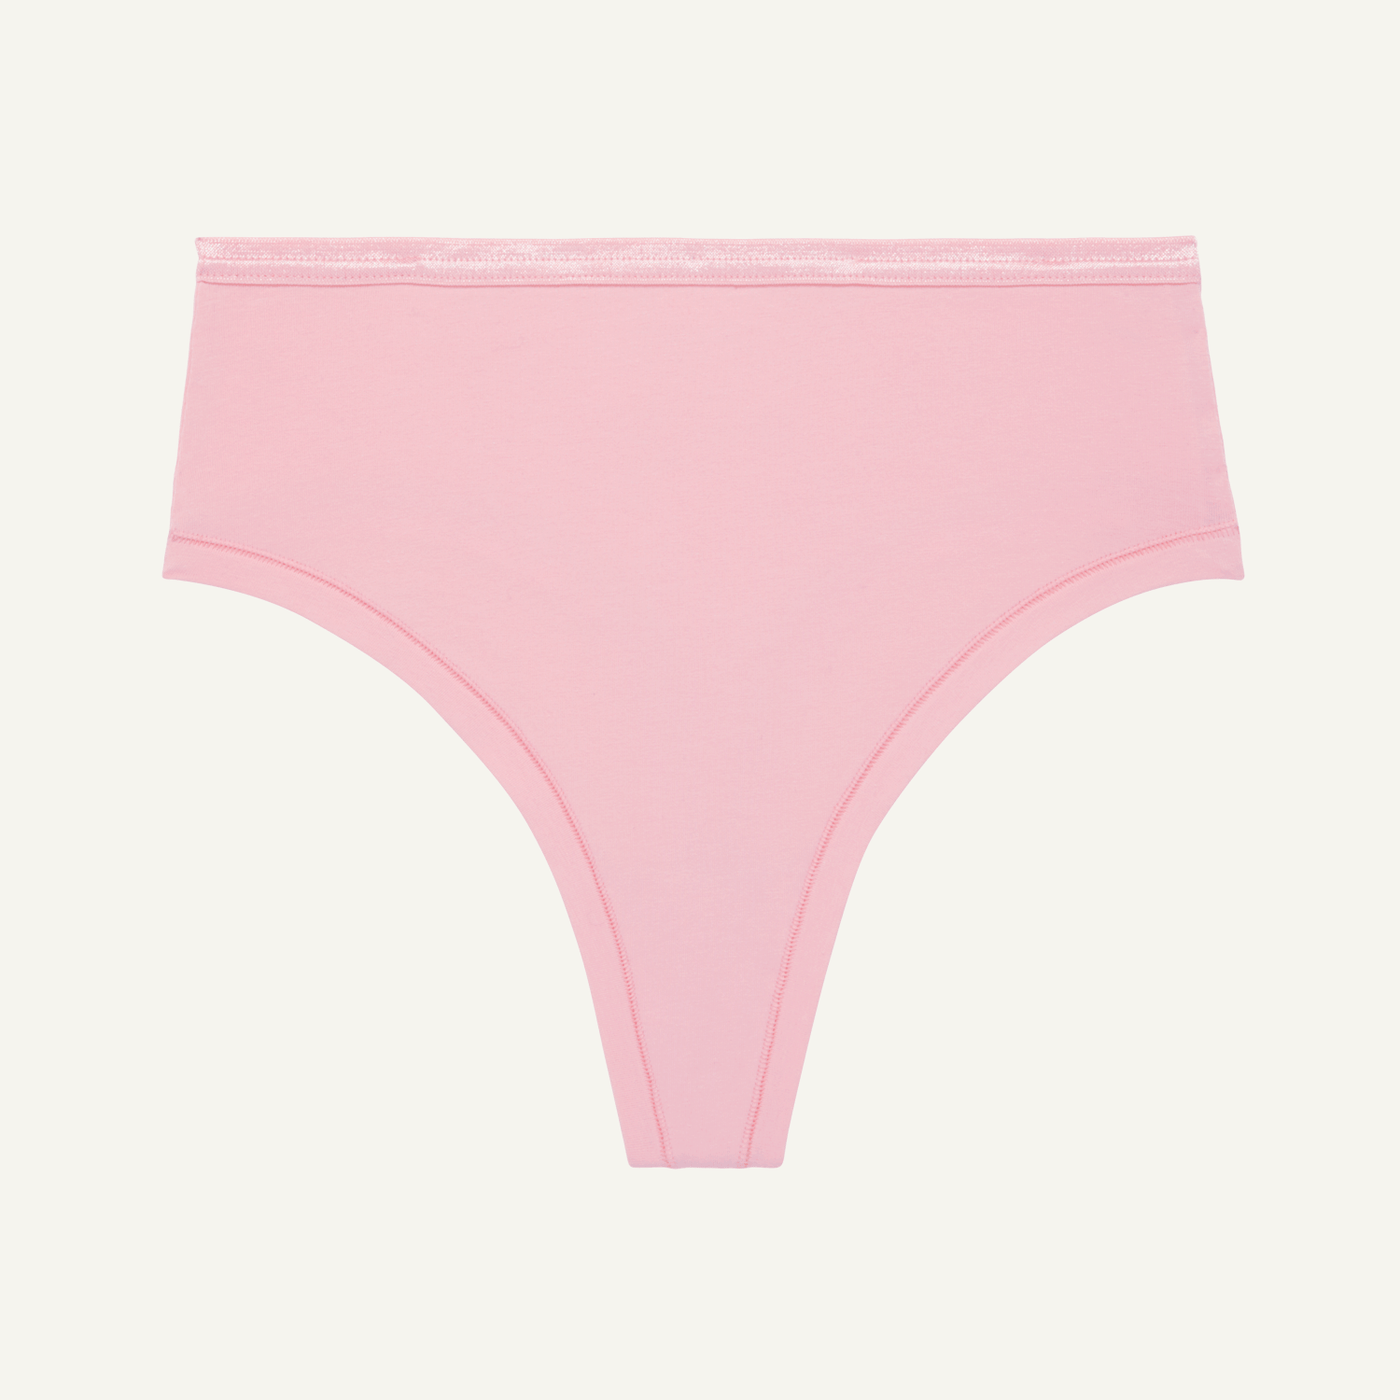 SALE High-Rise Thong in Rosy Cheeks